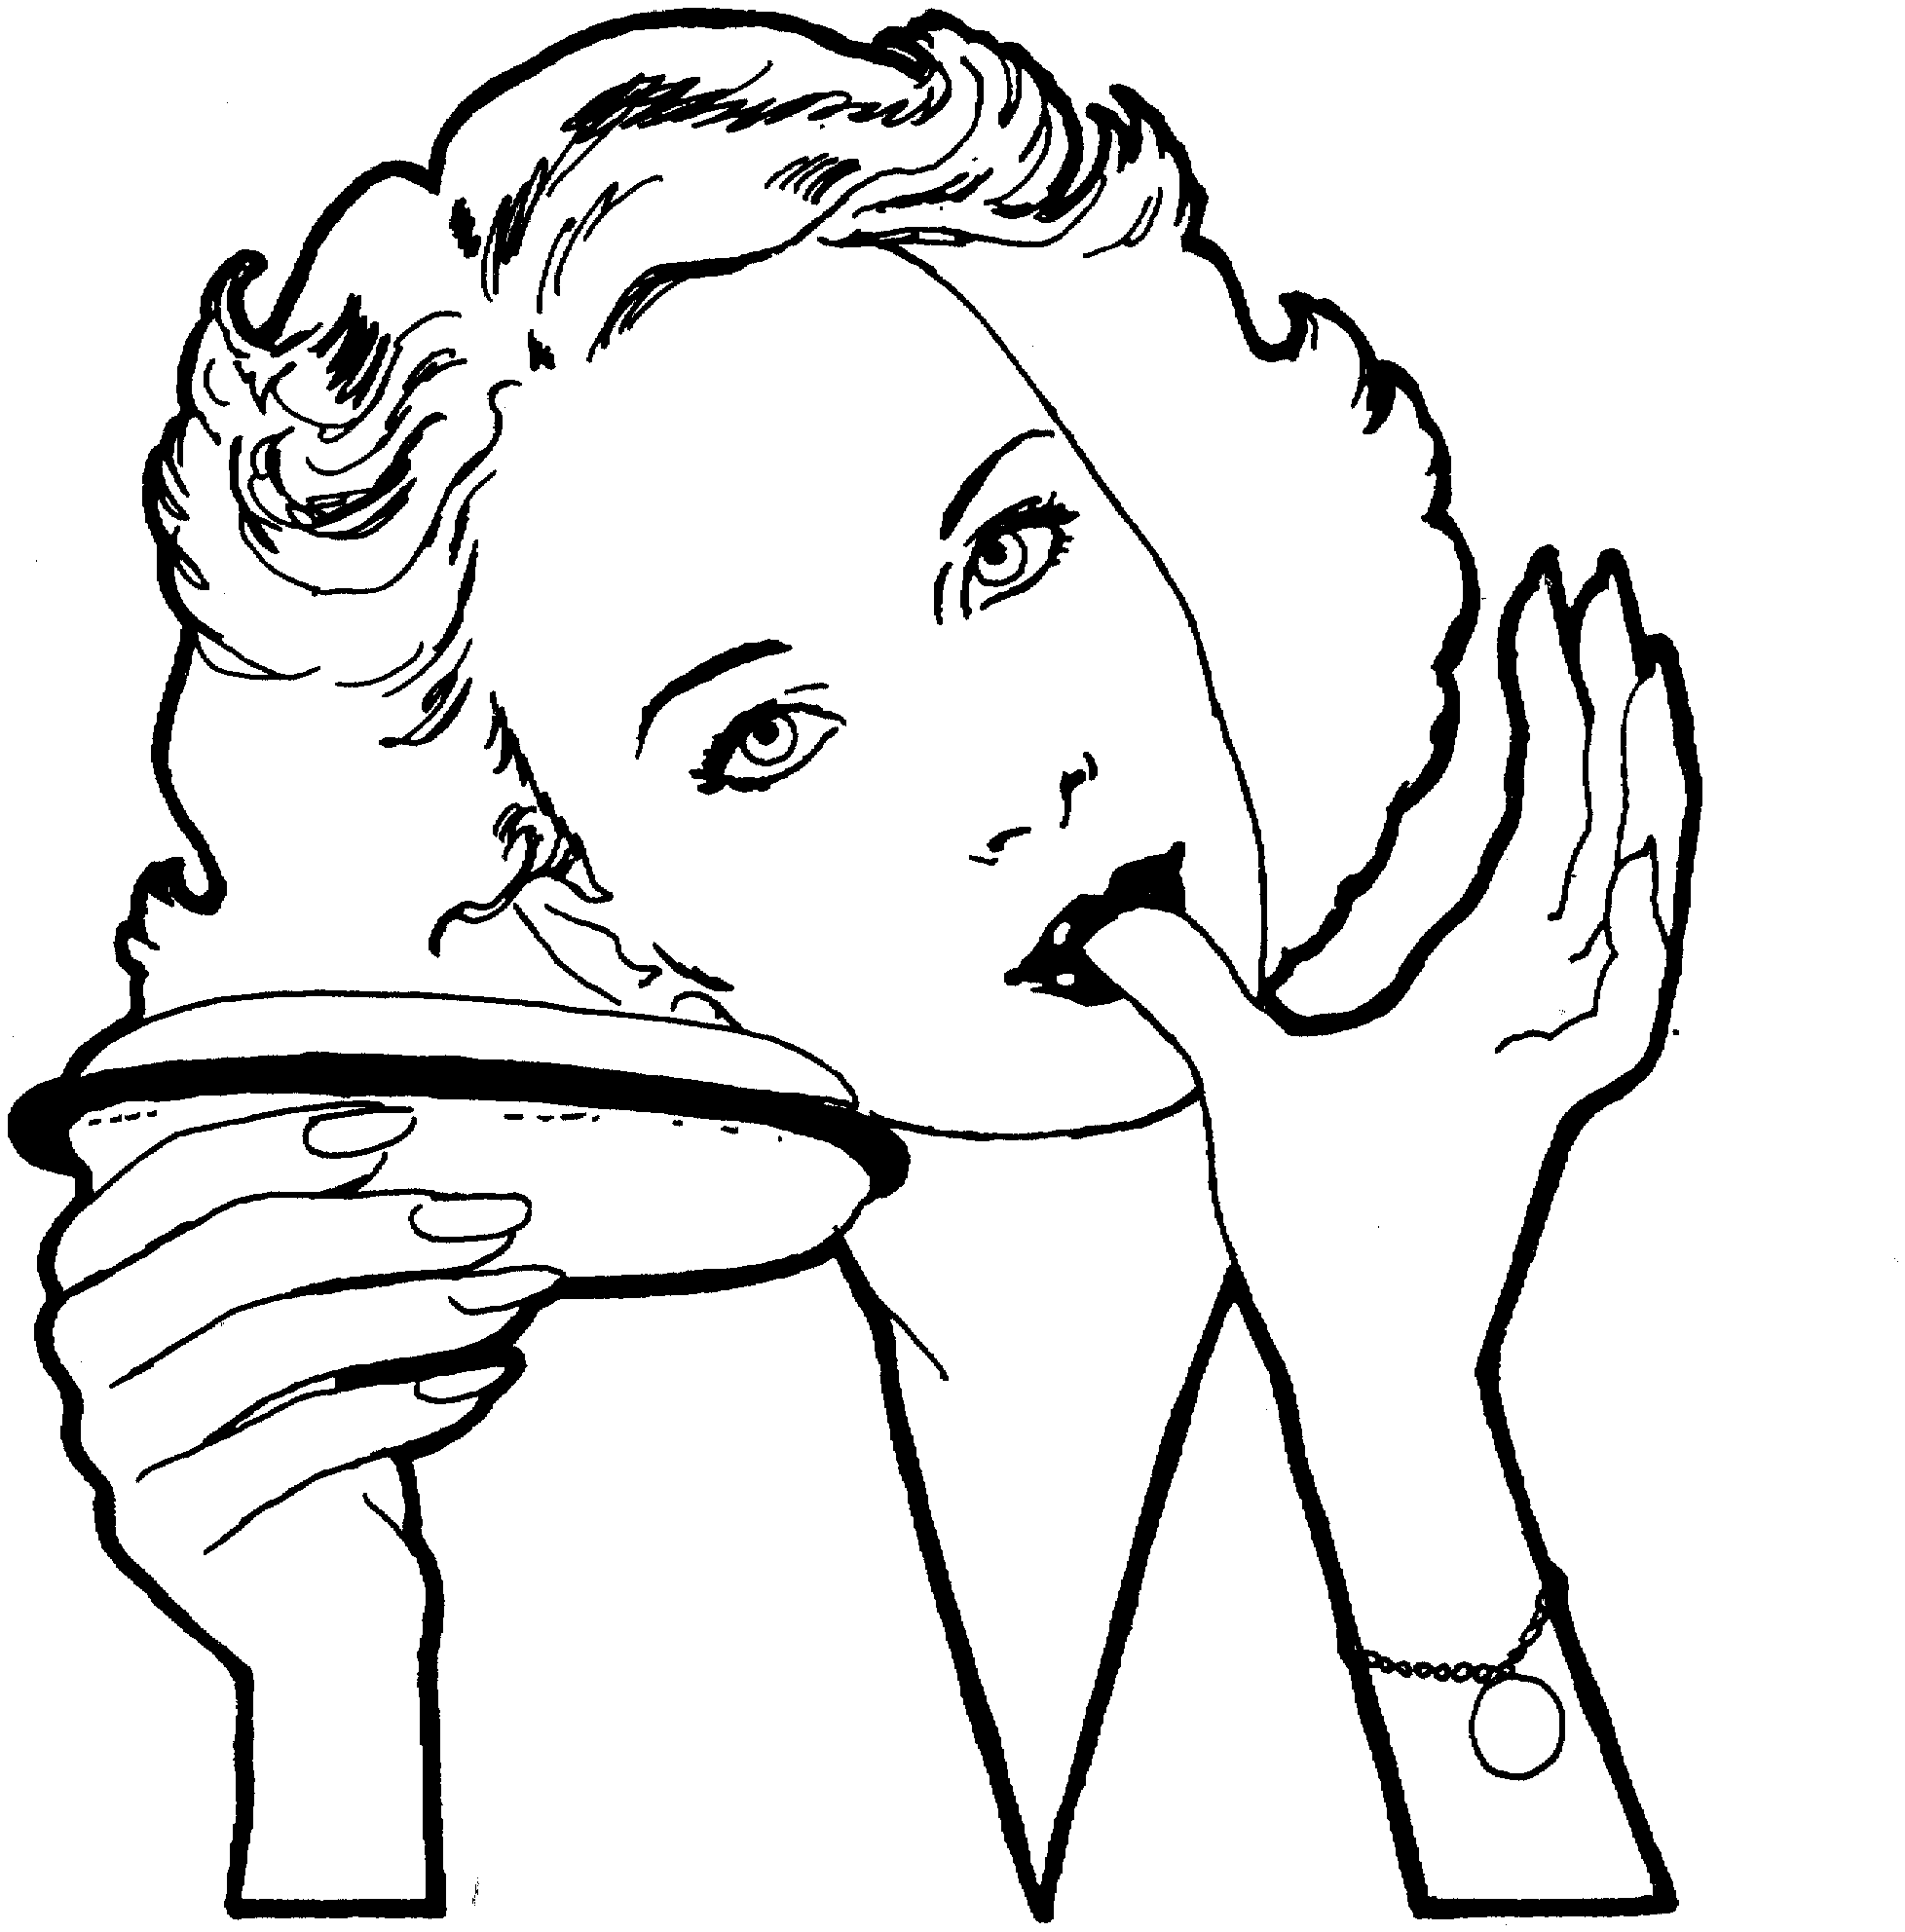 Free coloring pages of skylaners hot dog